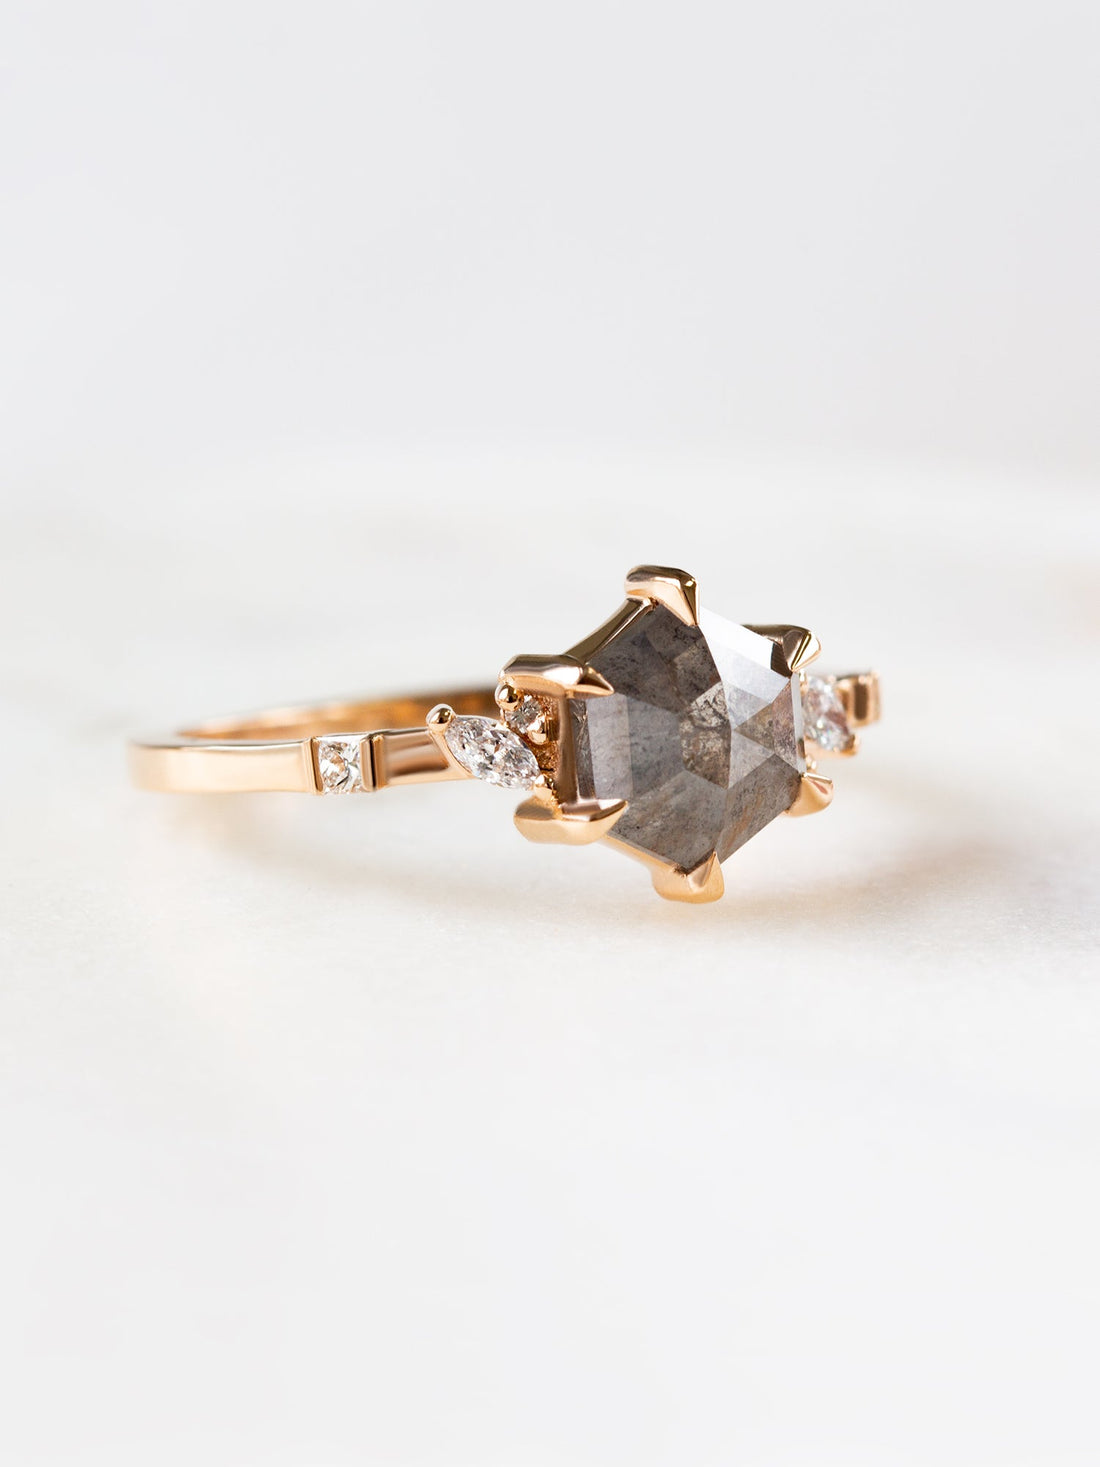 Unique art deco styled hexagon shaped salt and pepper diamond engagement ring in 14k rose gold with smaller marquise, round, and princess cut diamonds.